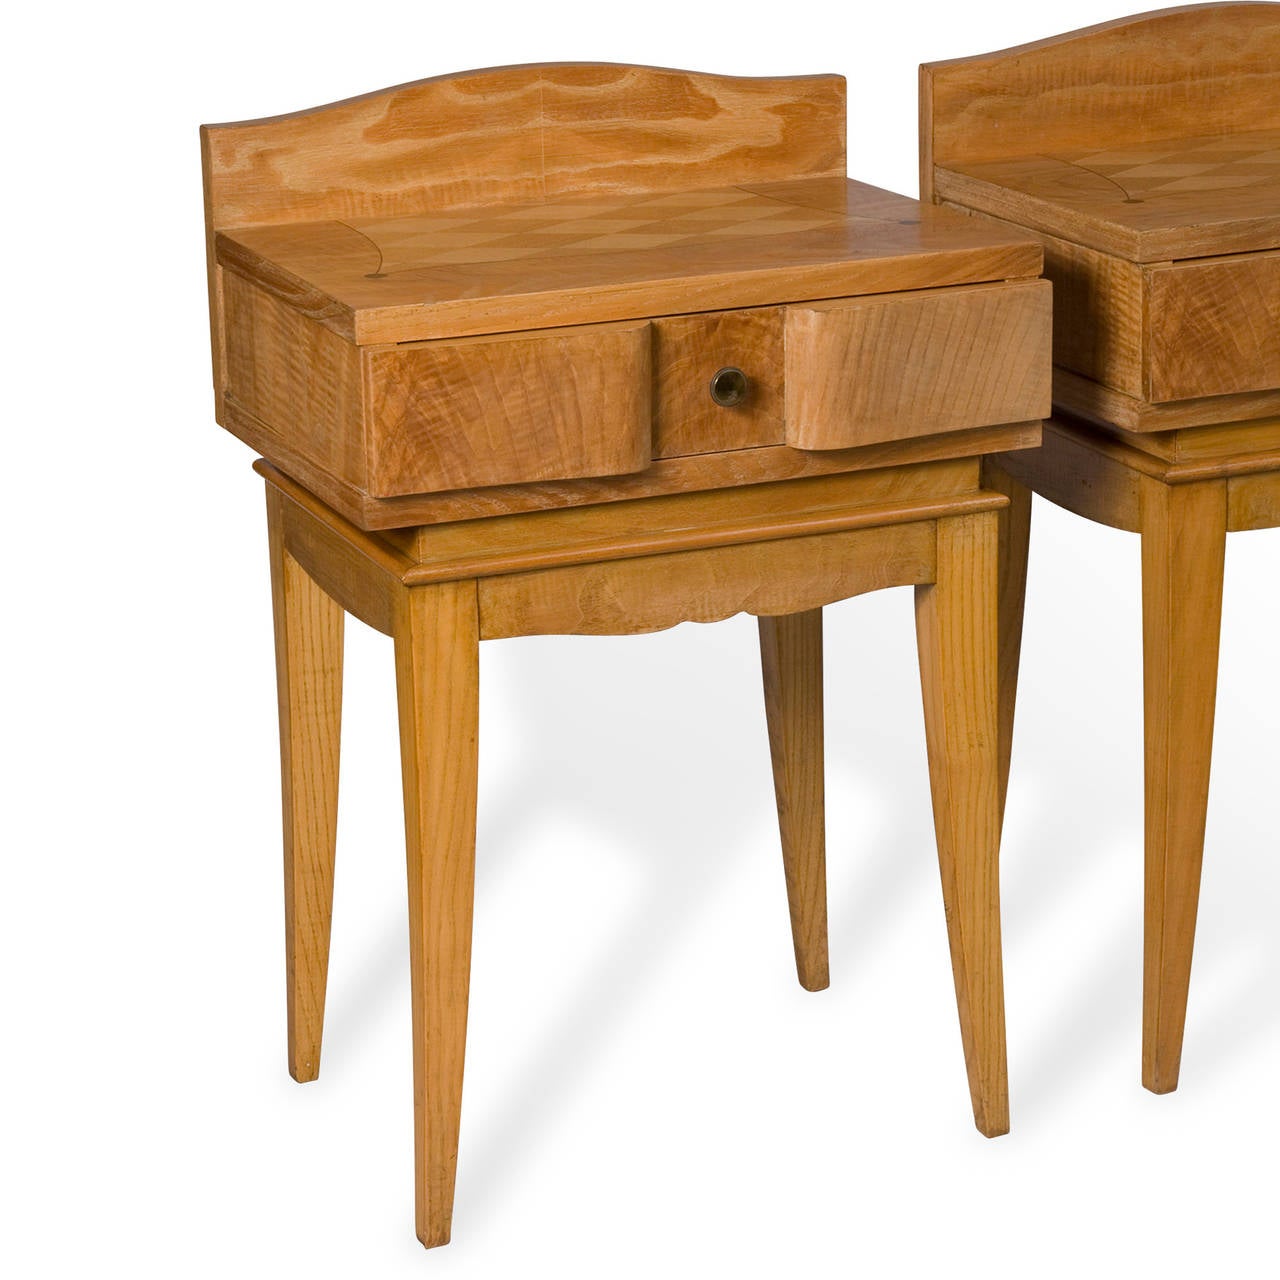 French Oak Inlaid End Tables In Excellent Condition For Sale In Brooklyn, NY